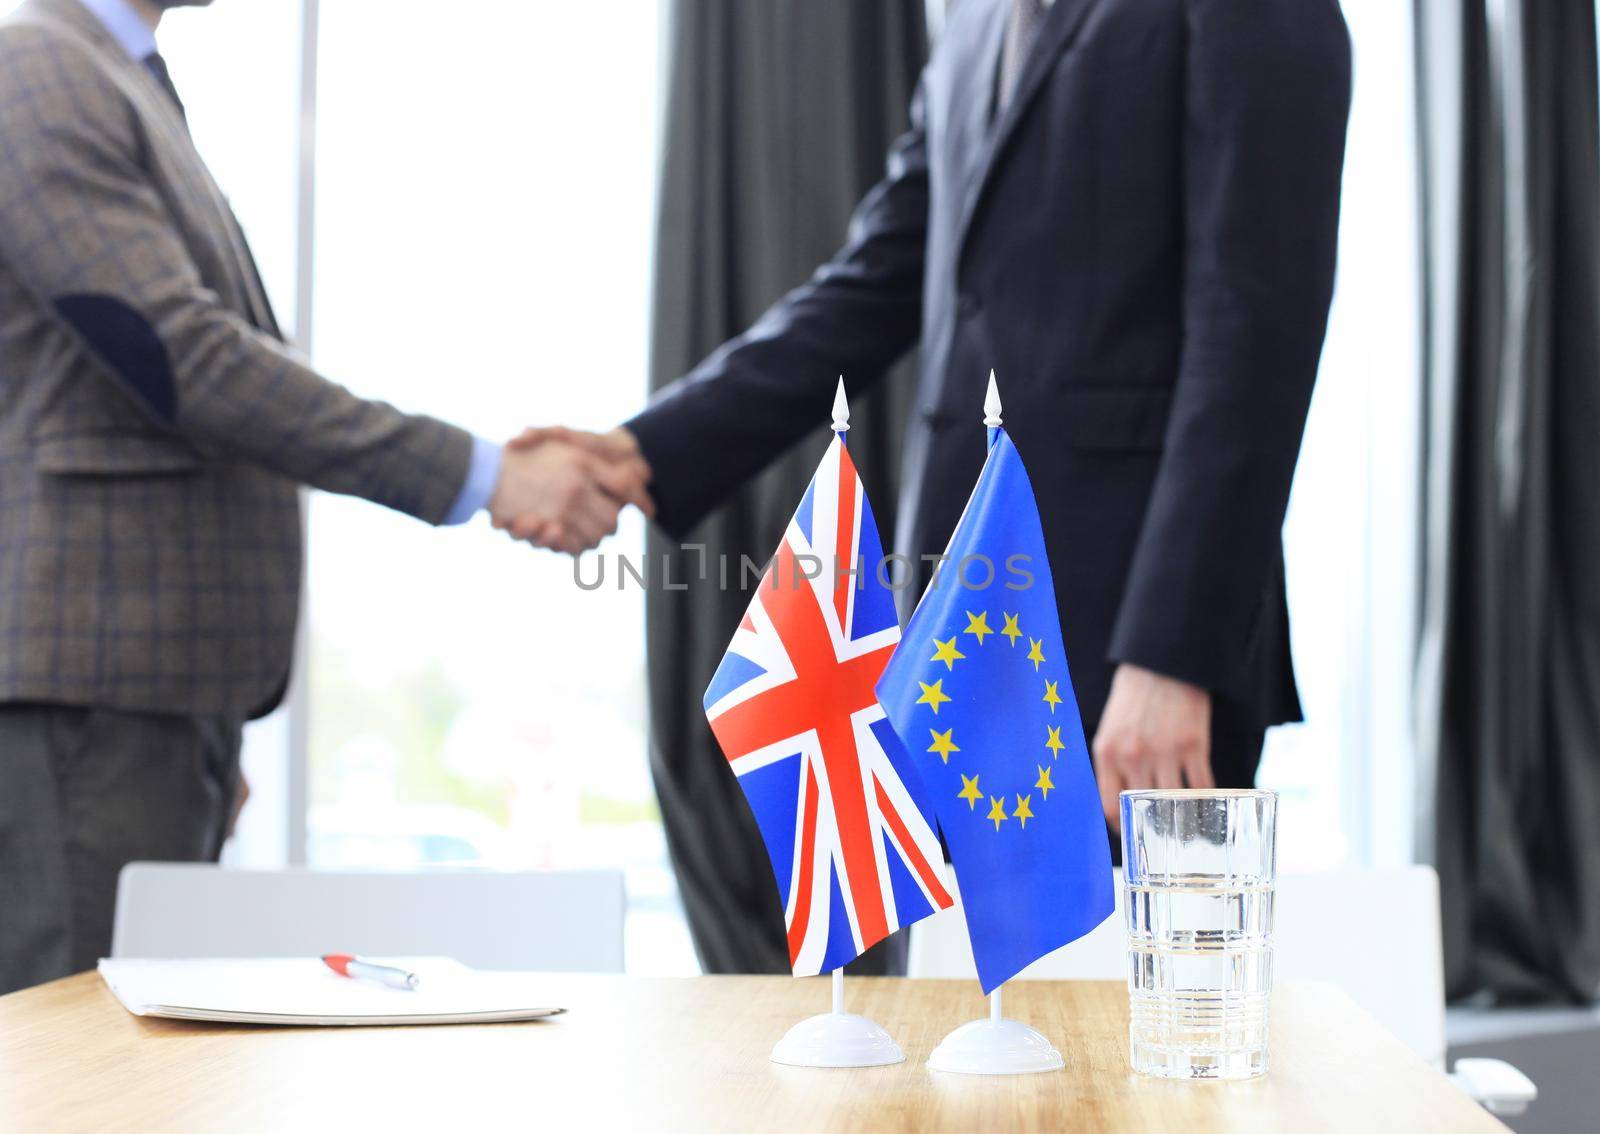 European Union and United Kingdom leaders shaking hands on a deal agreement by tsyhun